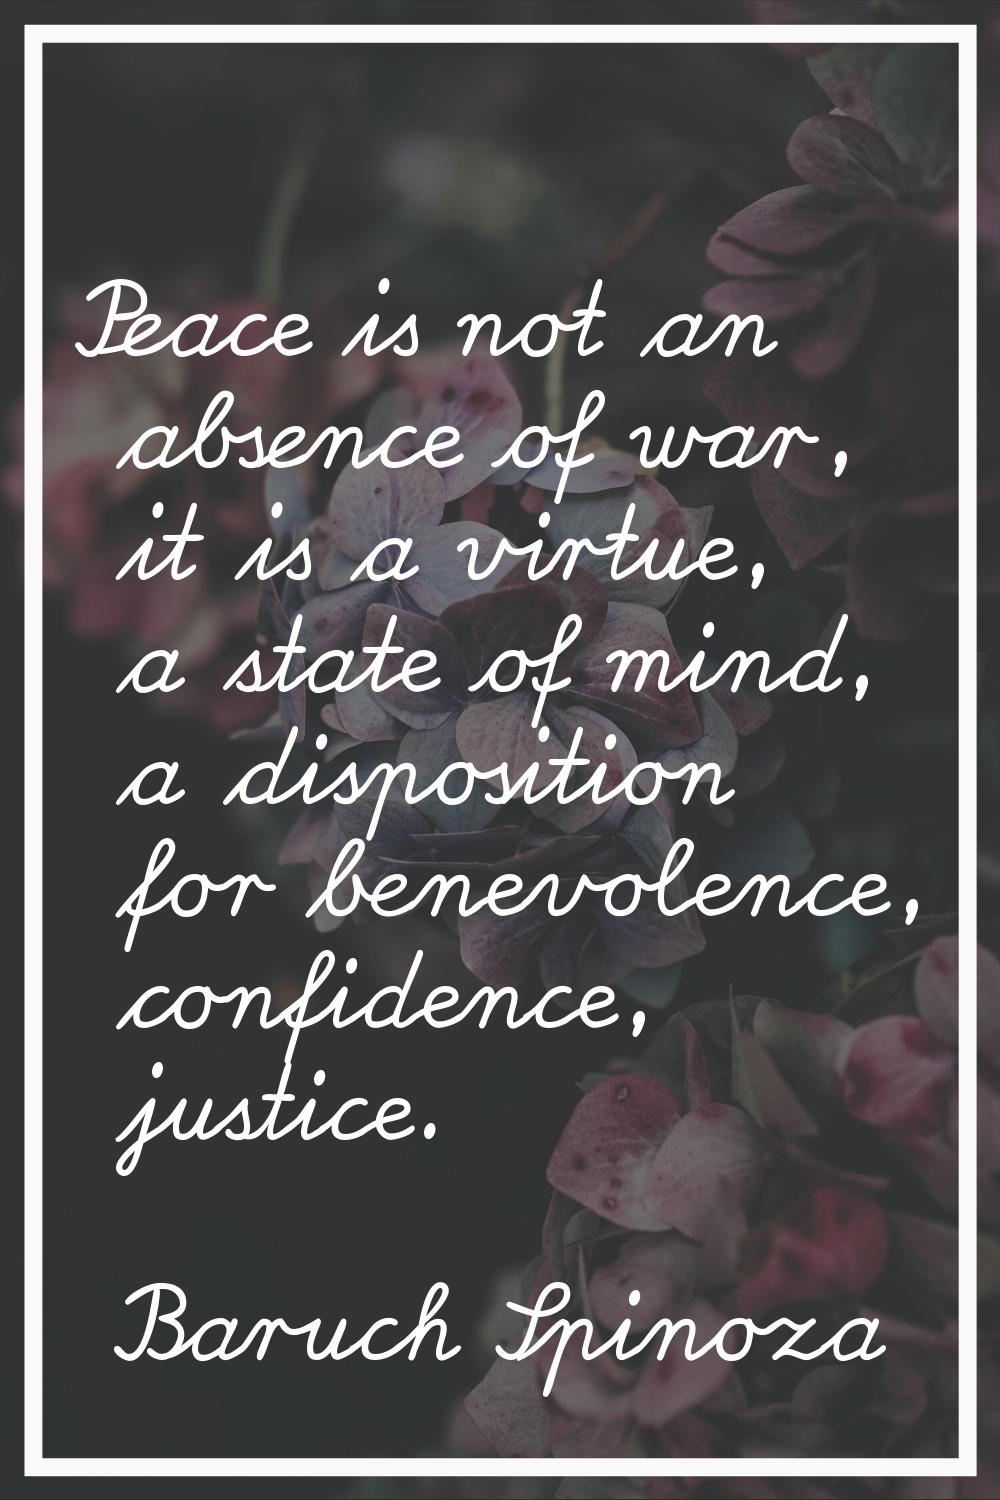 Peace is not an absence of war, it is a virtue, a state of mind, a disposition for benevolence, con